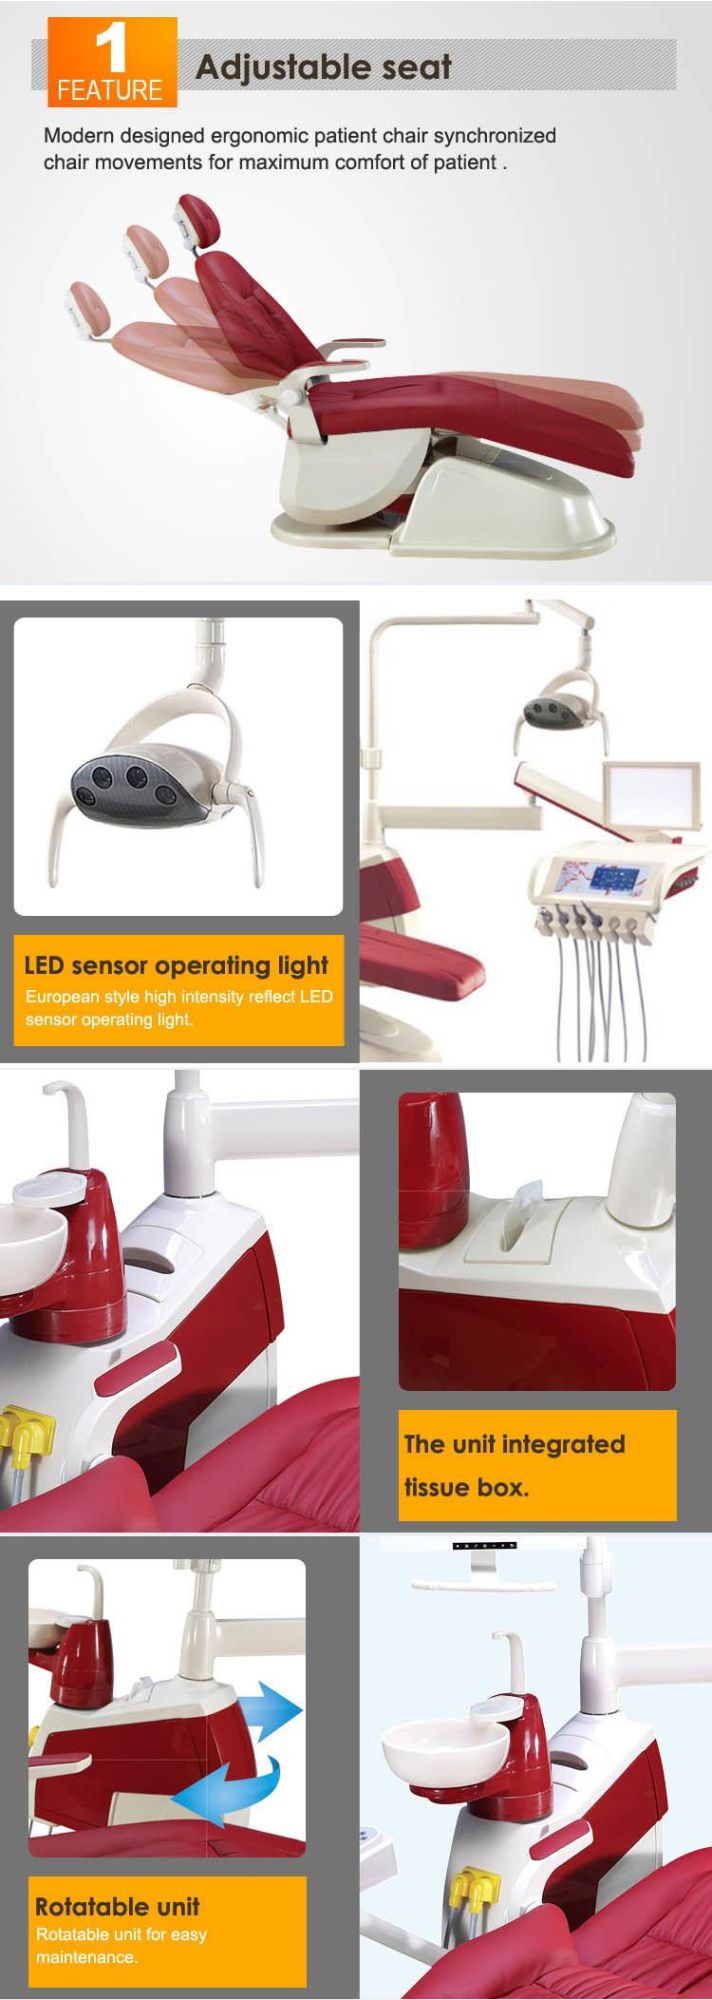 Rotatable Unit FDA Approved Dental Chair Certified Dental Supply/Affordable Dental Products/Dental Medical Equipment